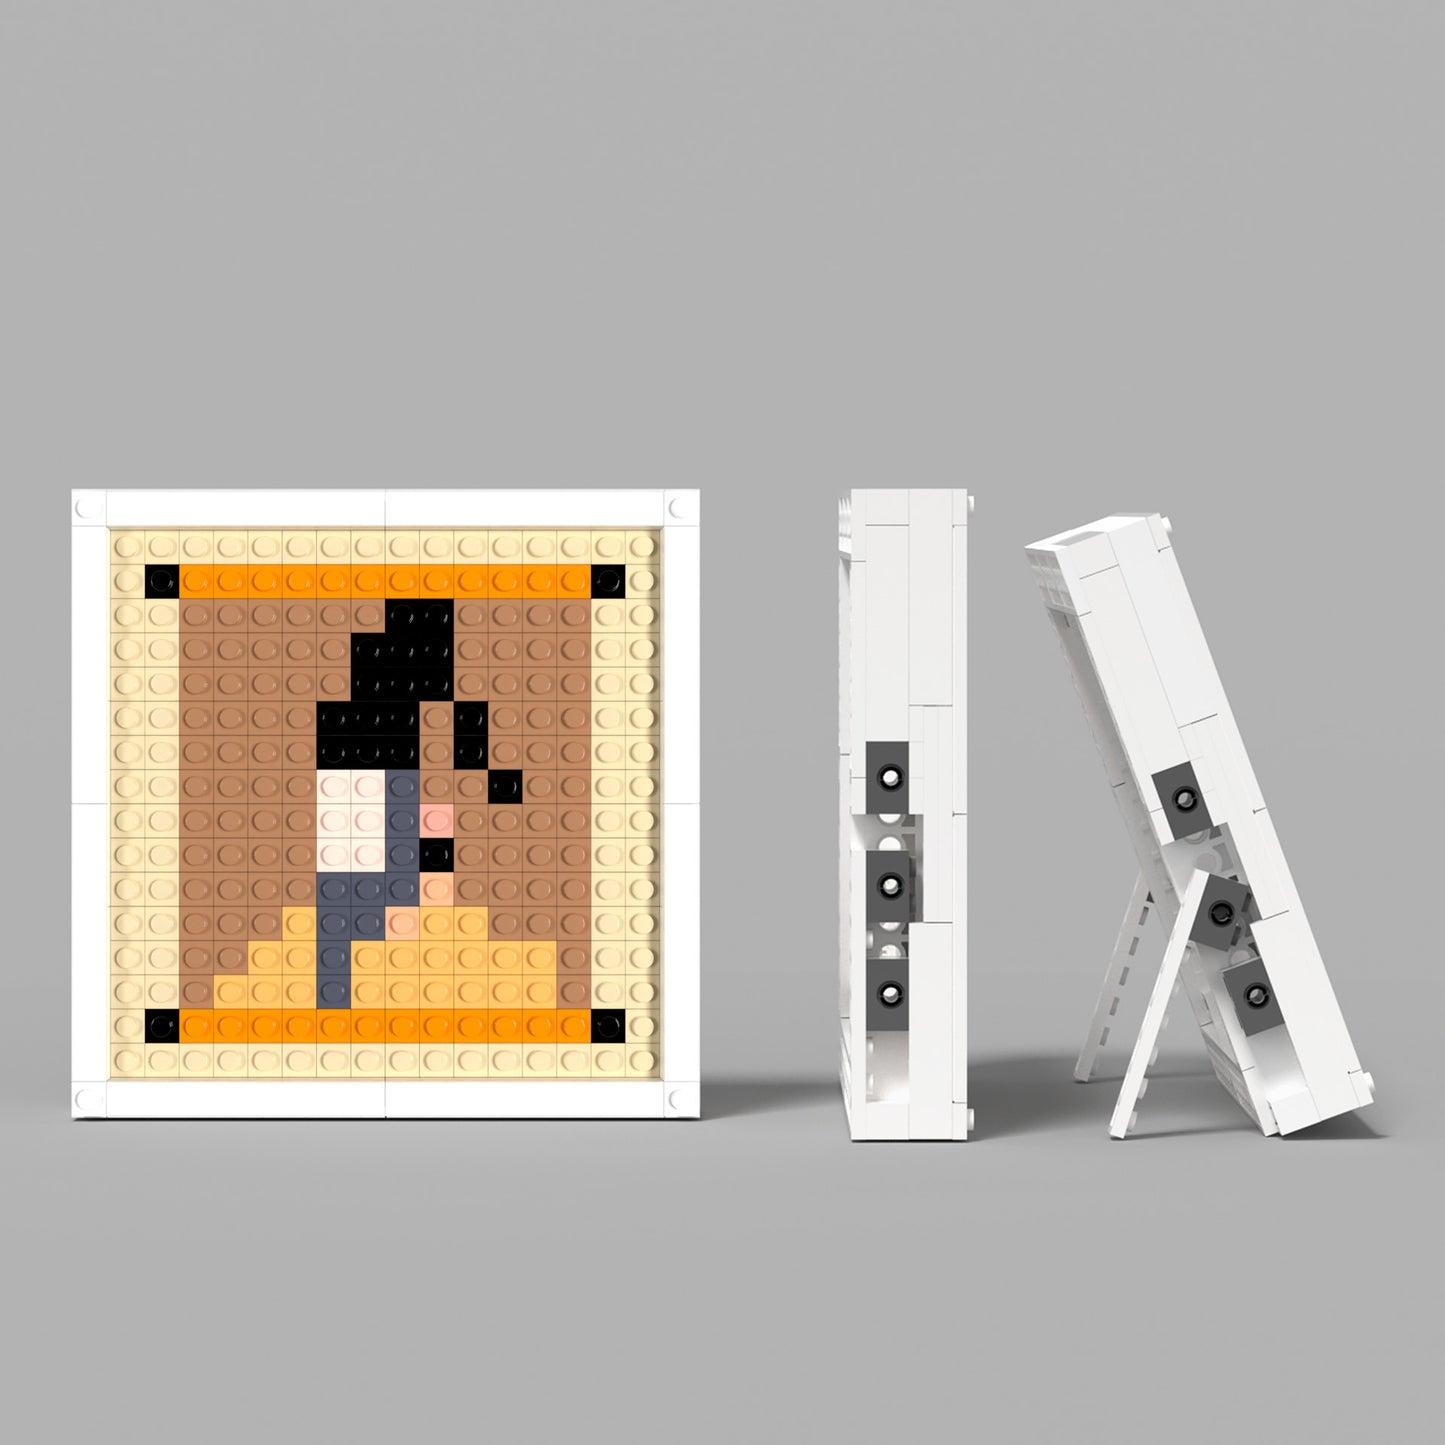 Pixel Art of Ancient Chinese Official Compatible Lego Set - A Minimalist Portrait of Traditional Costume